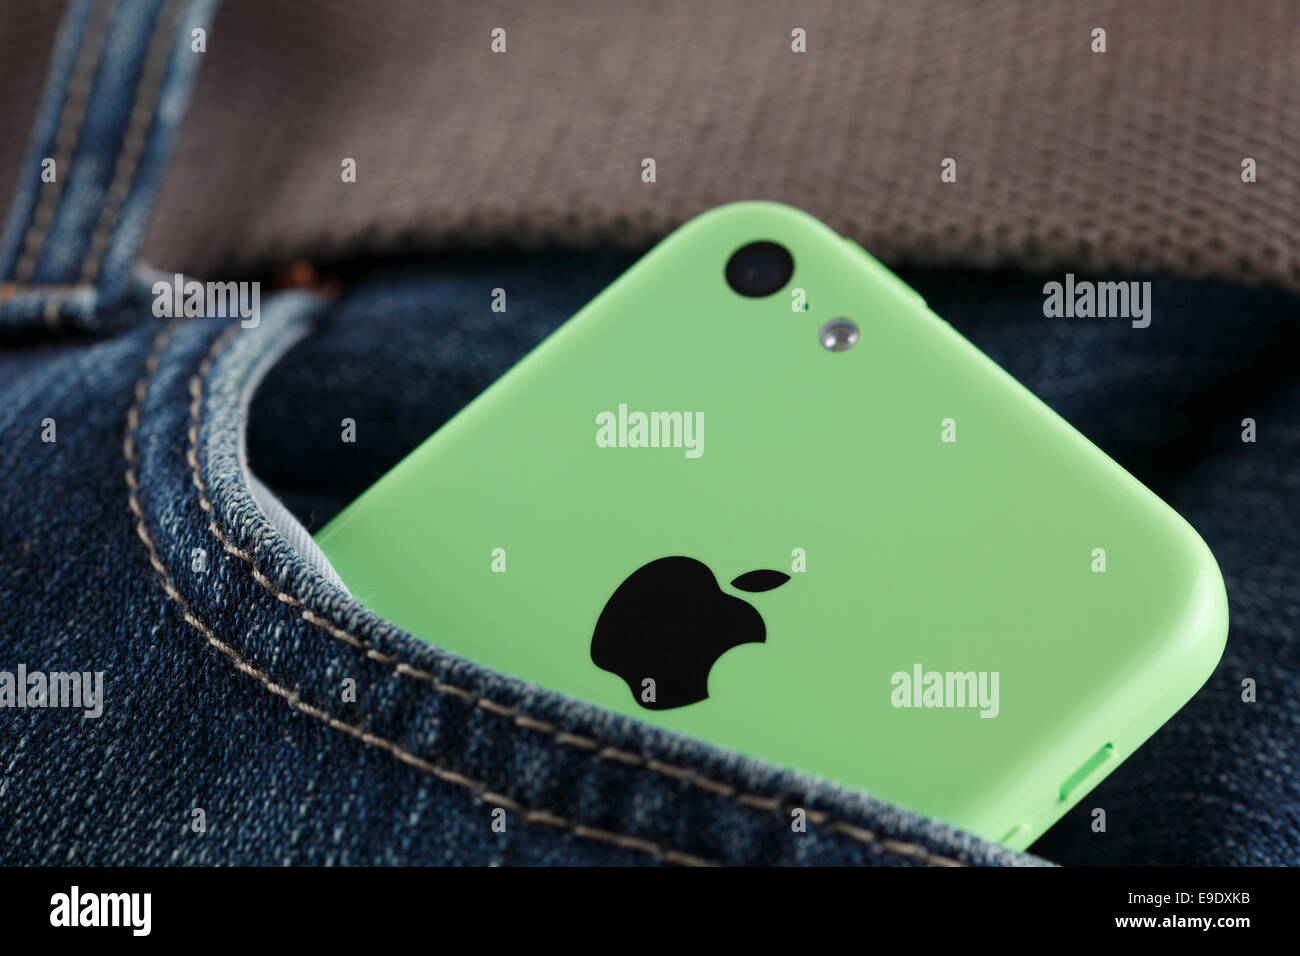 Tambov, Russian Federation - October 16, 2013  Apple iPhone 5C Green Color in a pocket of jeans. Studio shot. Stock Photo